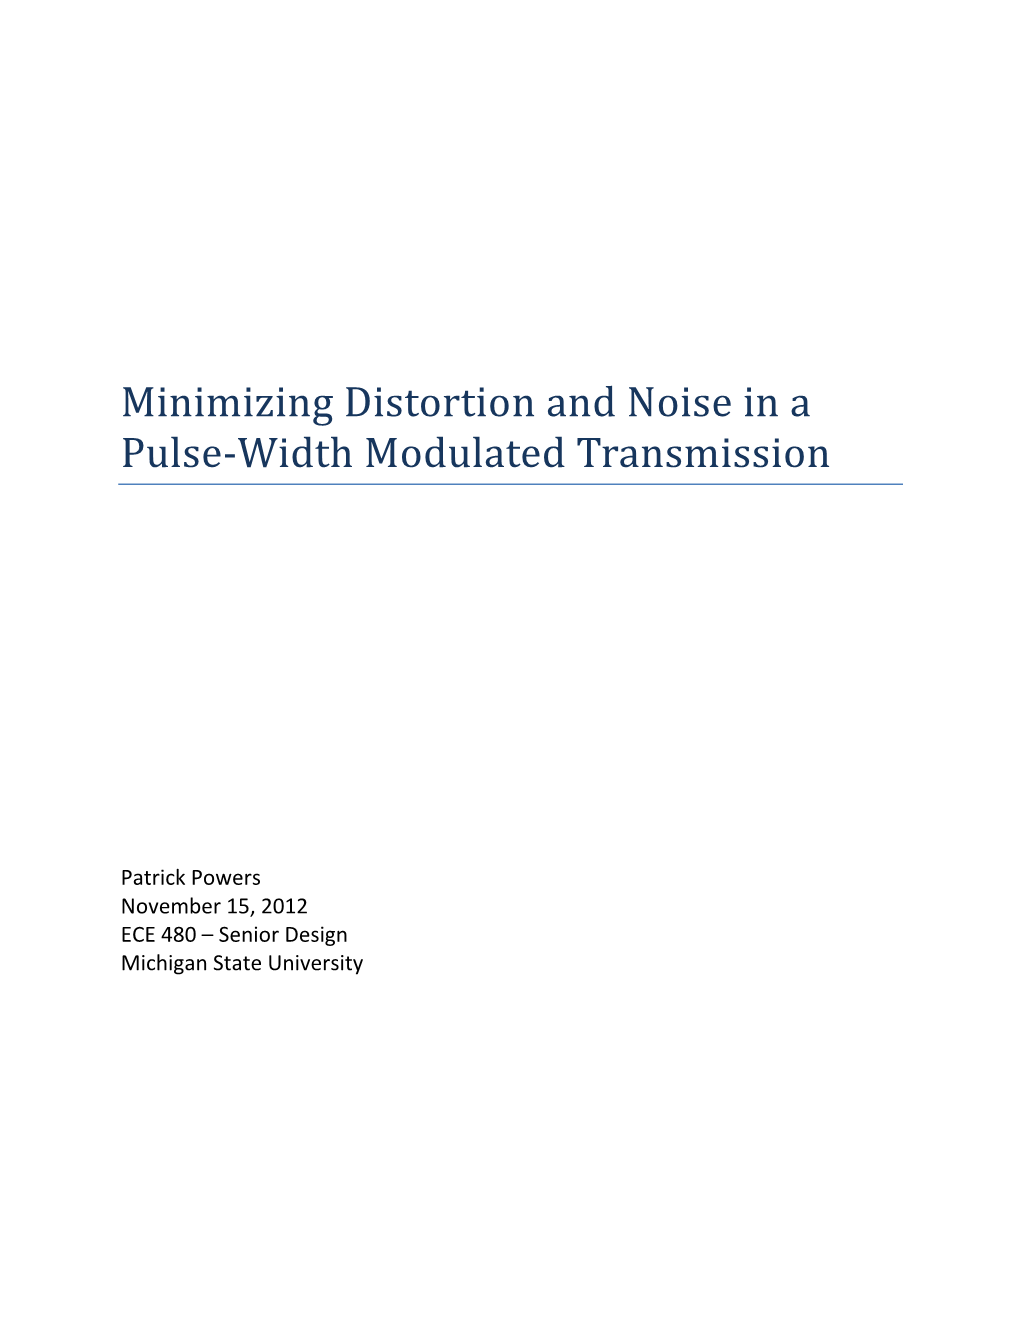 Minimizing Distortion and Noise in a Pulse-Width Modulated Transmission